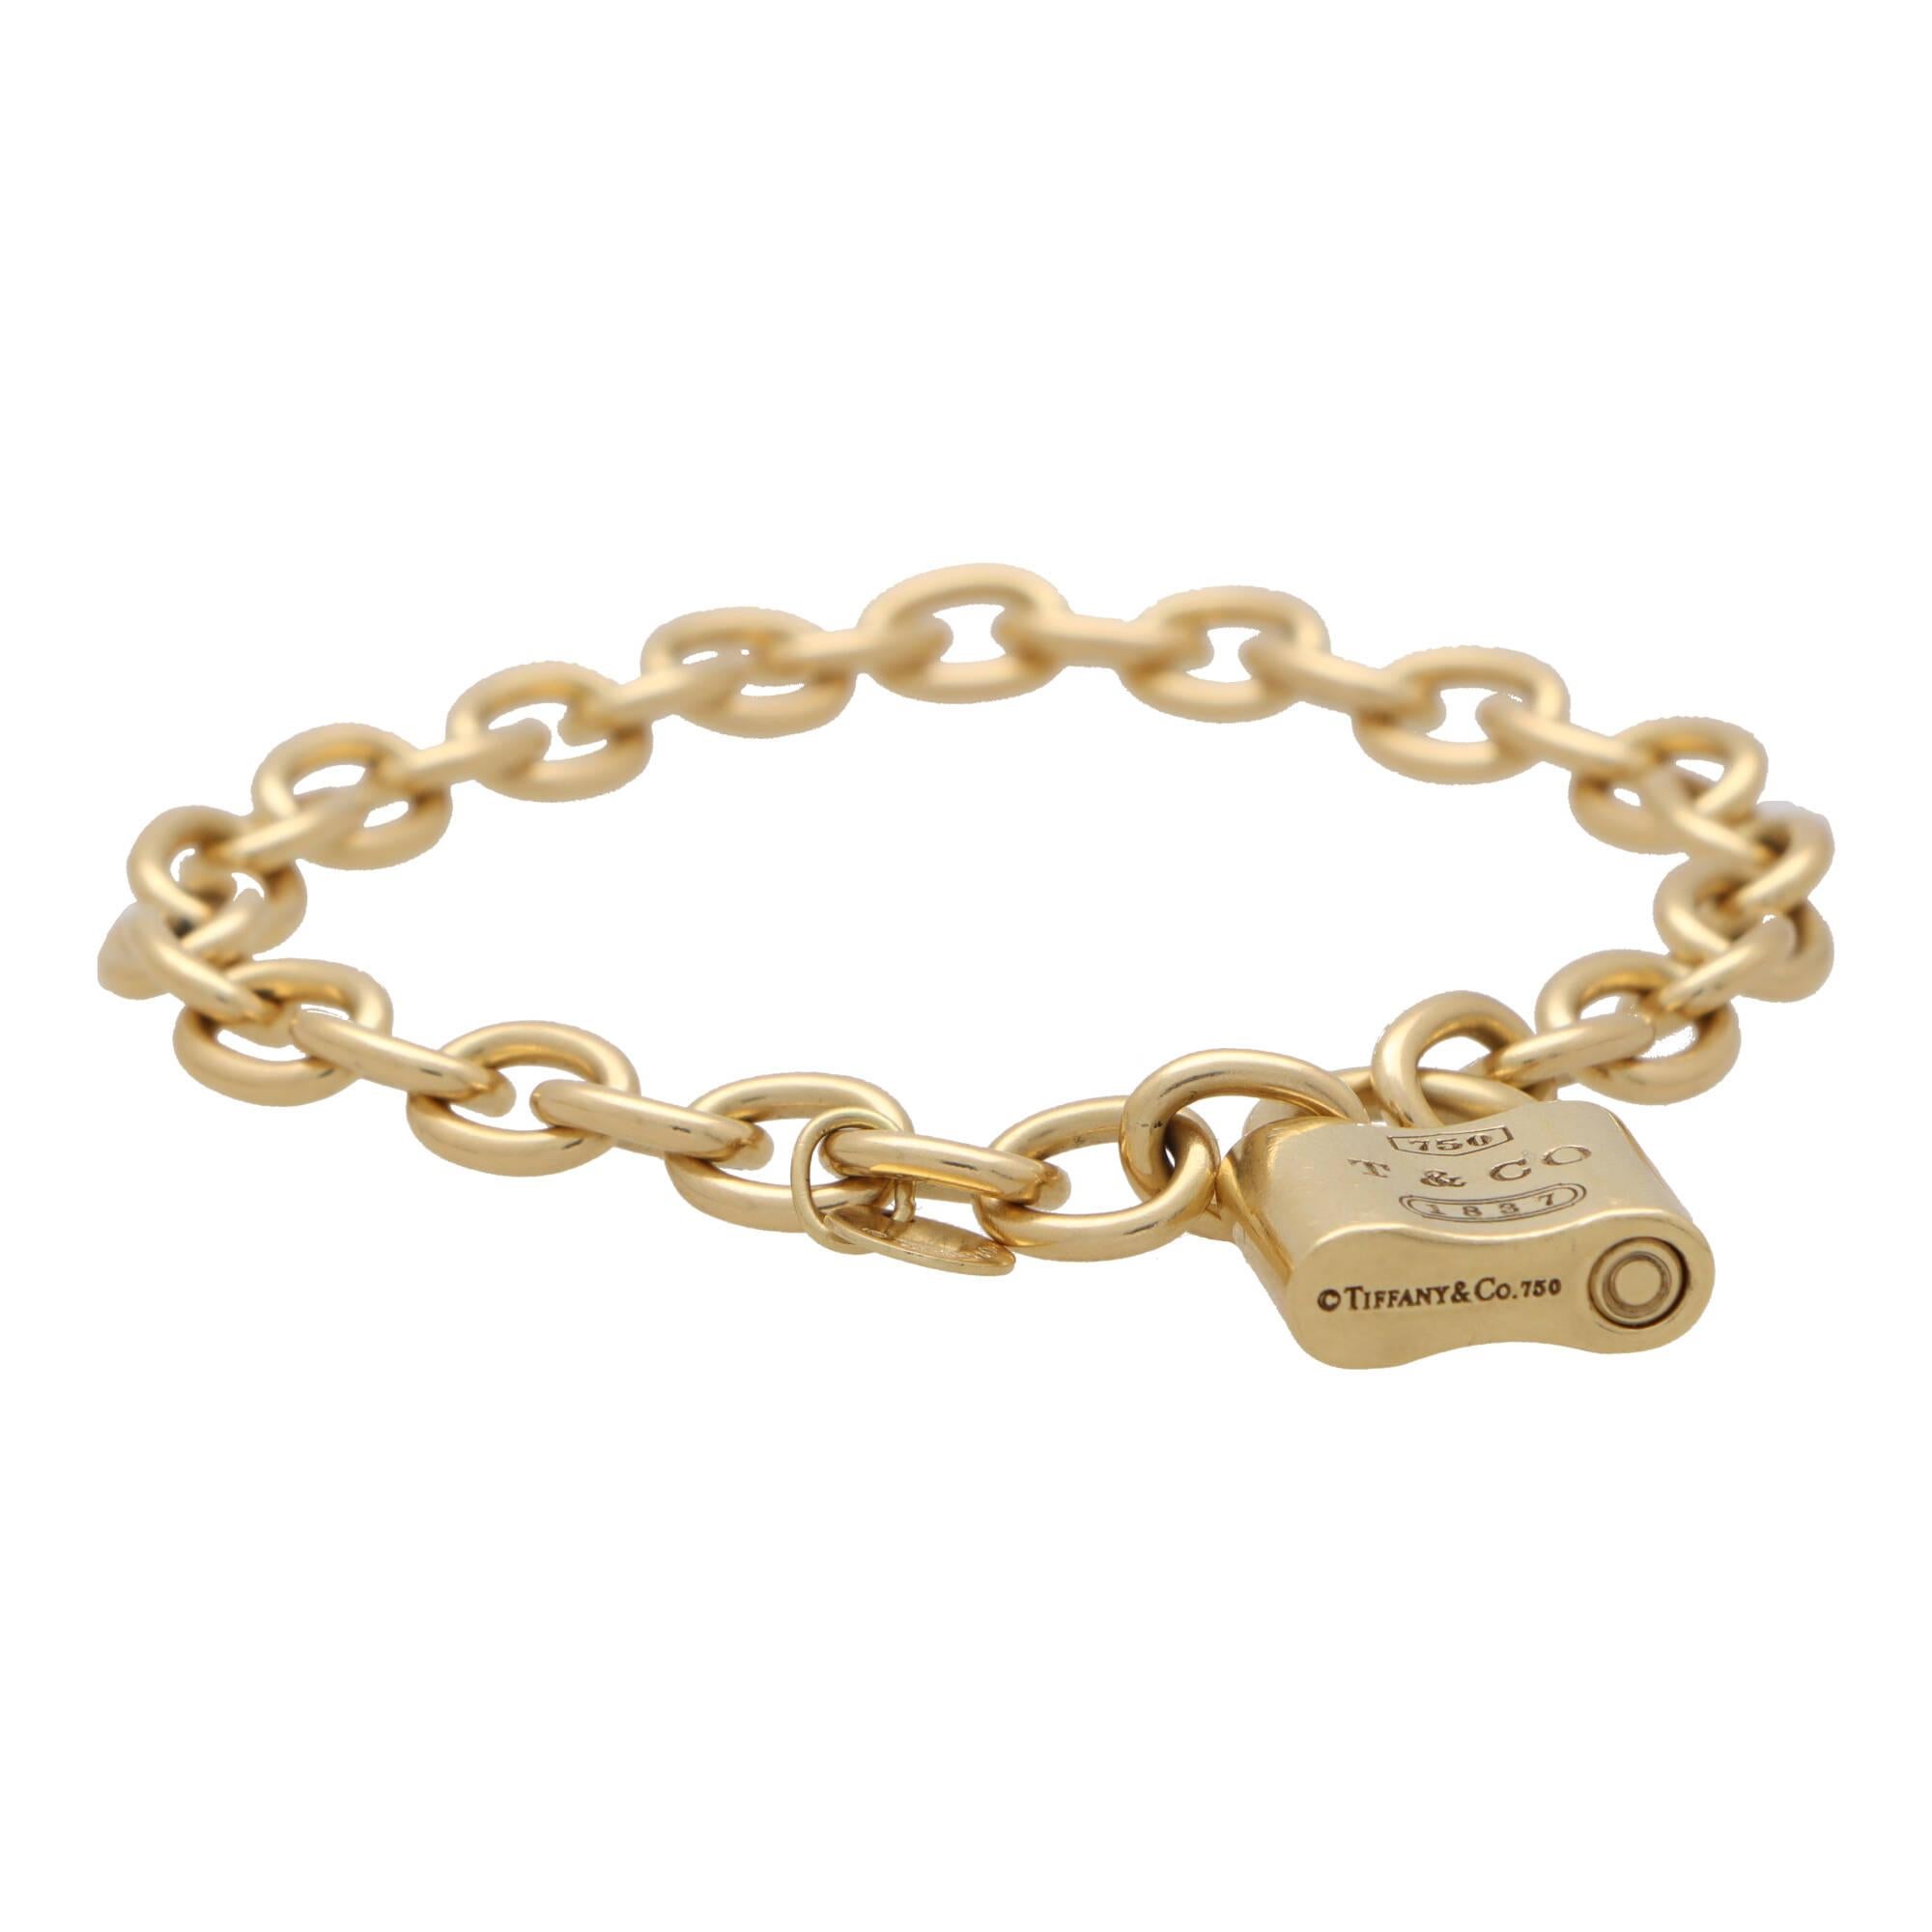 A vintage Tiffany & Co. open link ‘ Padlock’ bracelet set in 18k yellow gold.

The bracelet is composed of 32 oval solid yellow gold links; all of which are connected together by a Tiffany & Co. padlock clasp. Due to the subtlety of the design, this